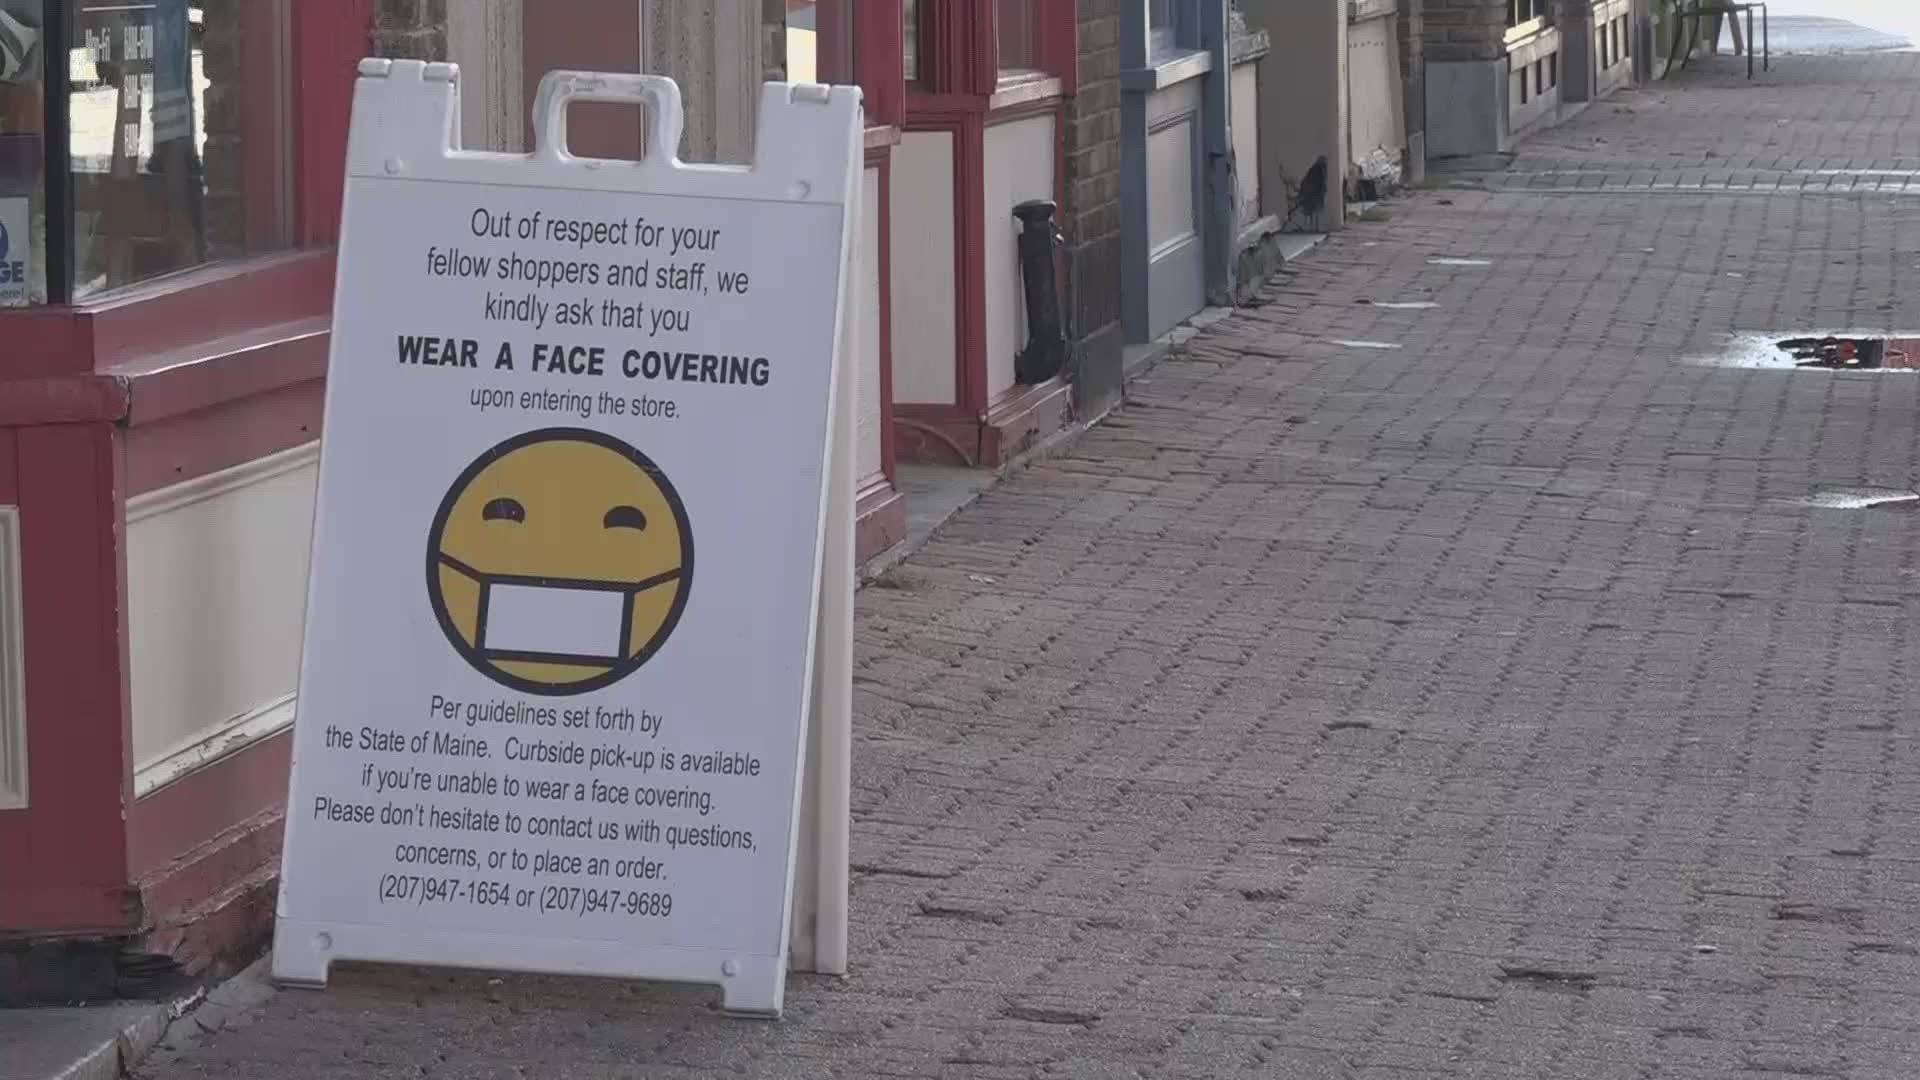 The city of Bangor aims to enforce the state's mask mandate by educating businesses.